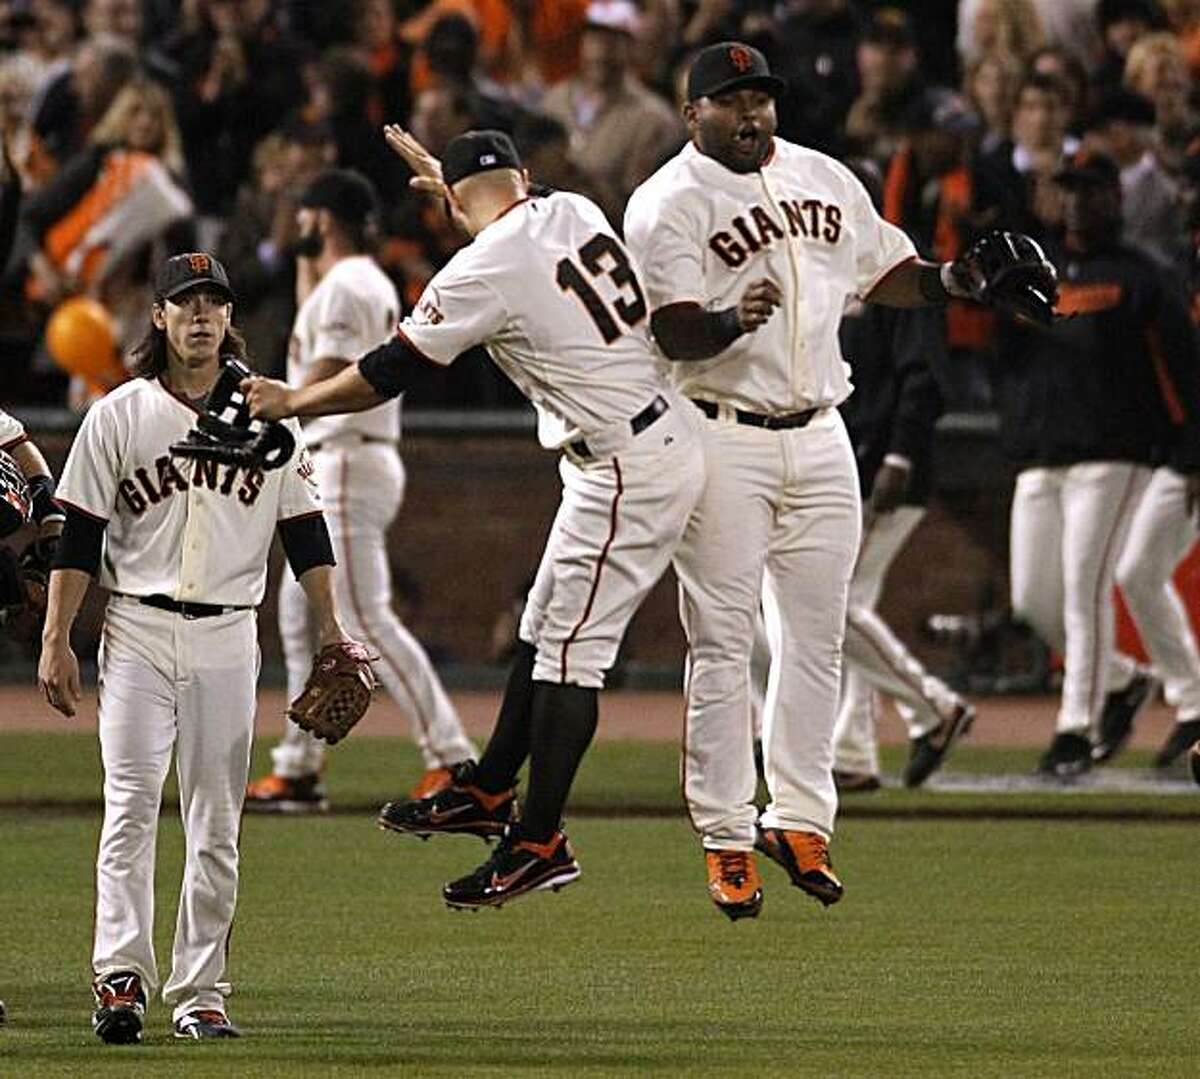 Cody Ross and Pablo Sandoval celebrate after the Giants and Tim Lincecum's win in the first game of the NL Divisional Series over the Atlanta Braves, 1-0, in San Francisco, Calif., on Thursday, Oct. 7, 2010.